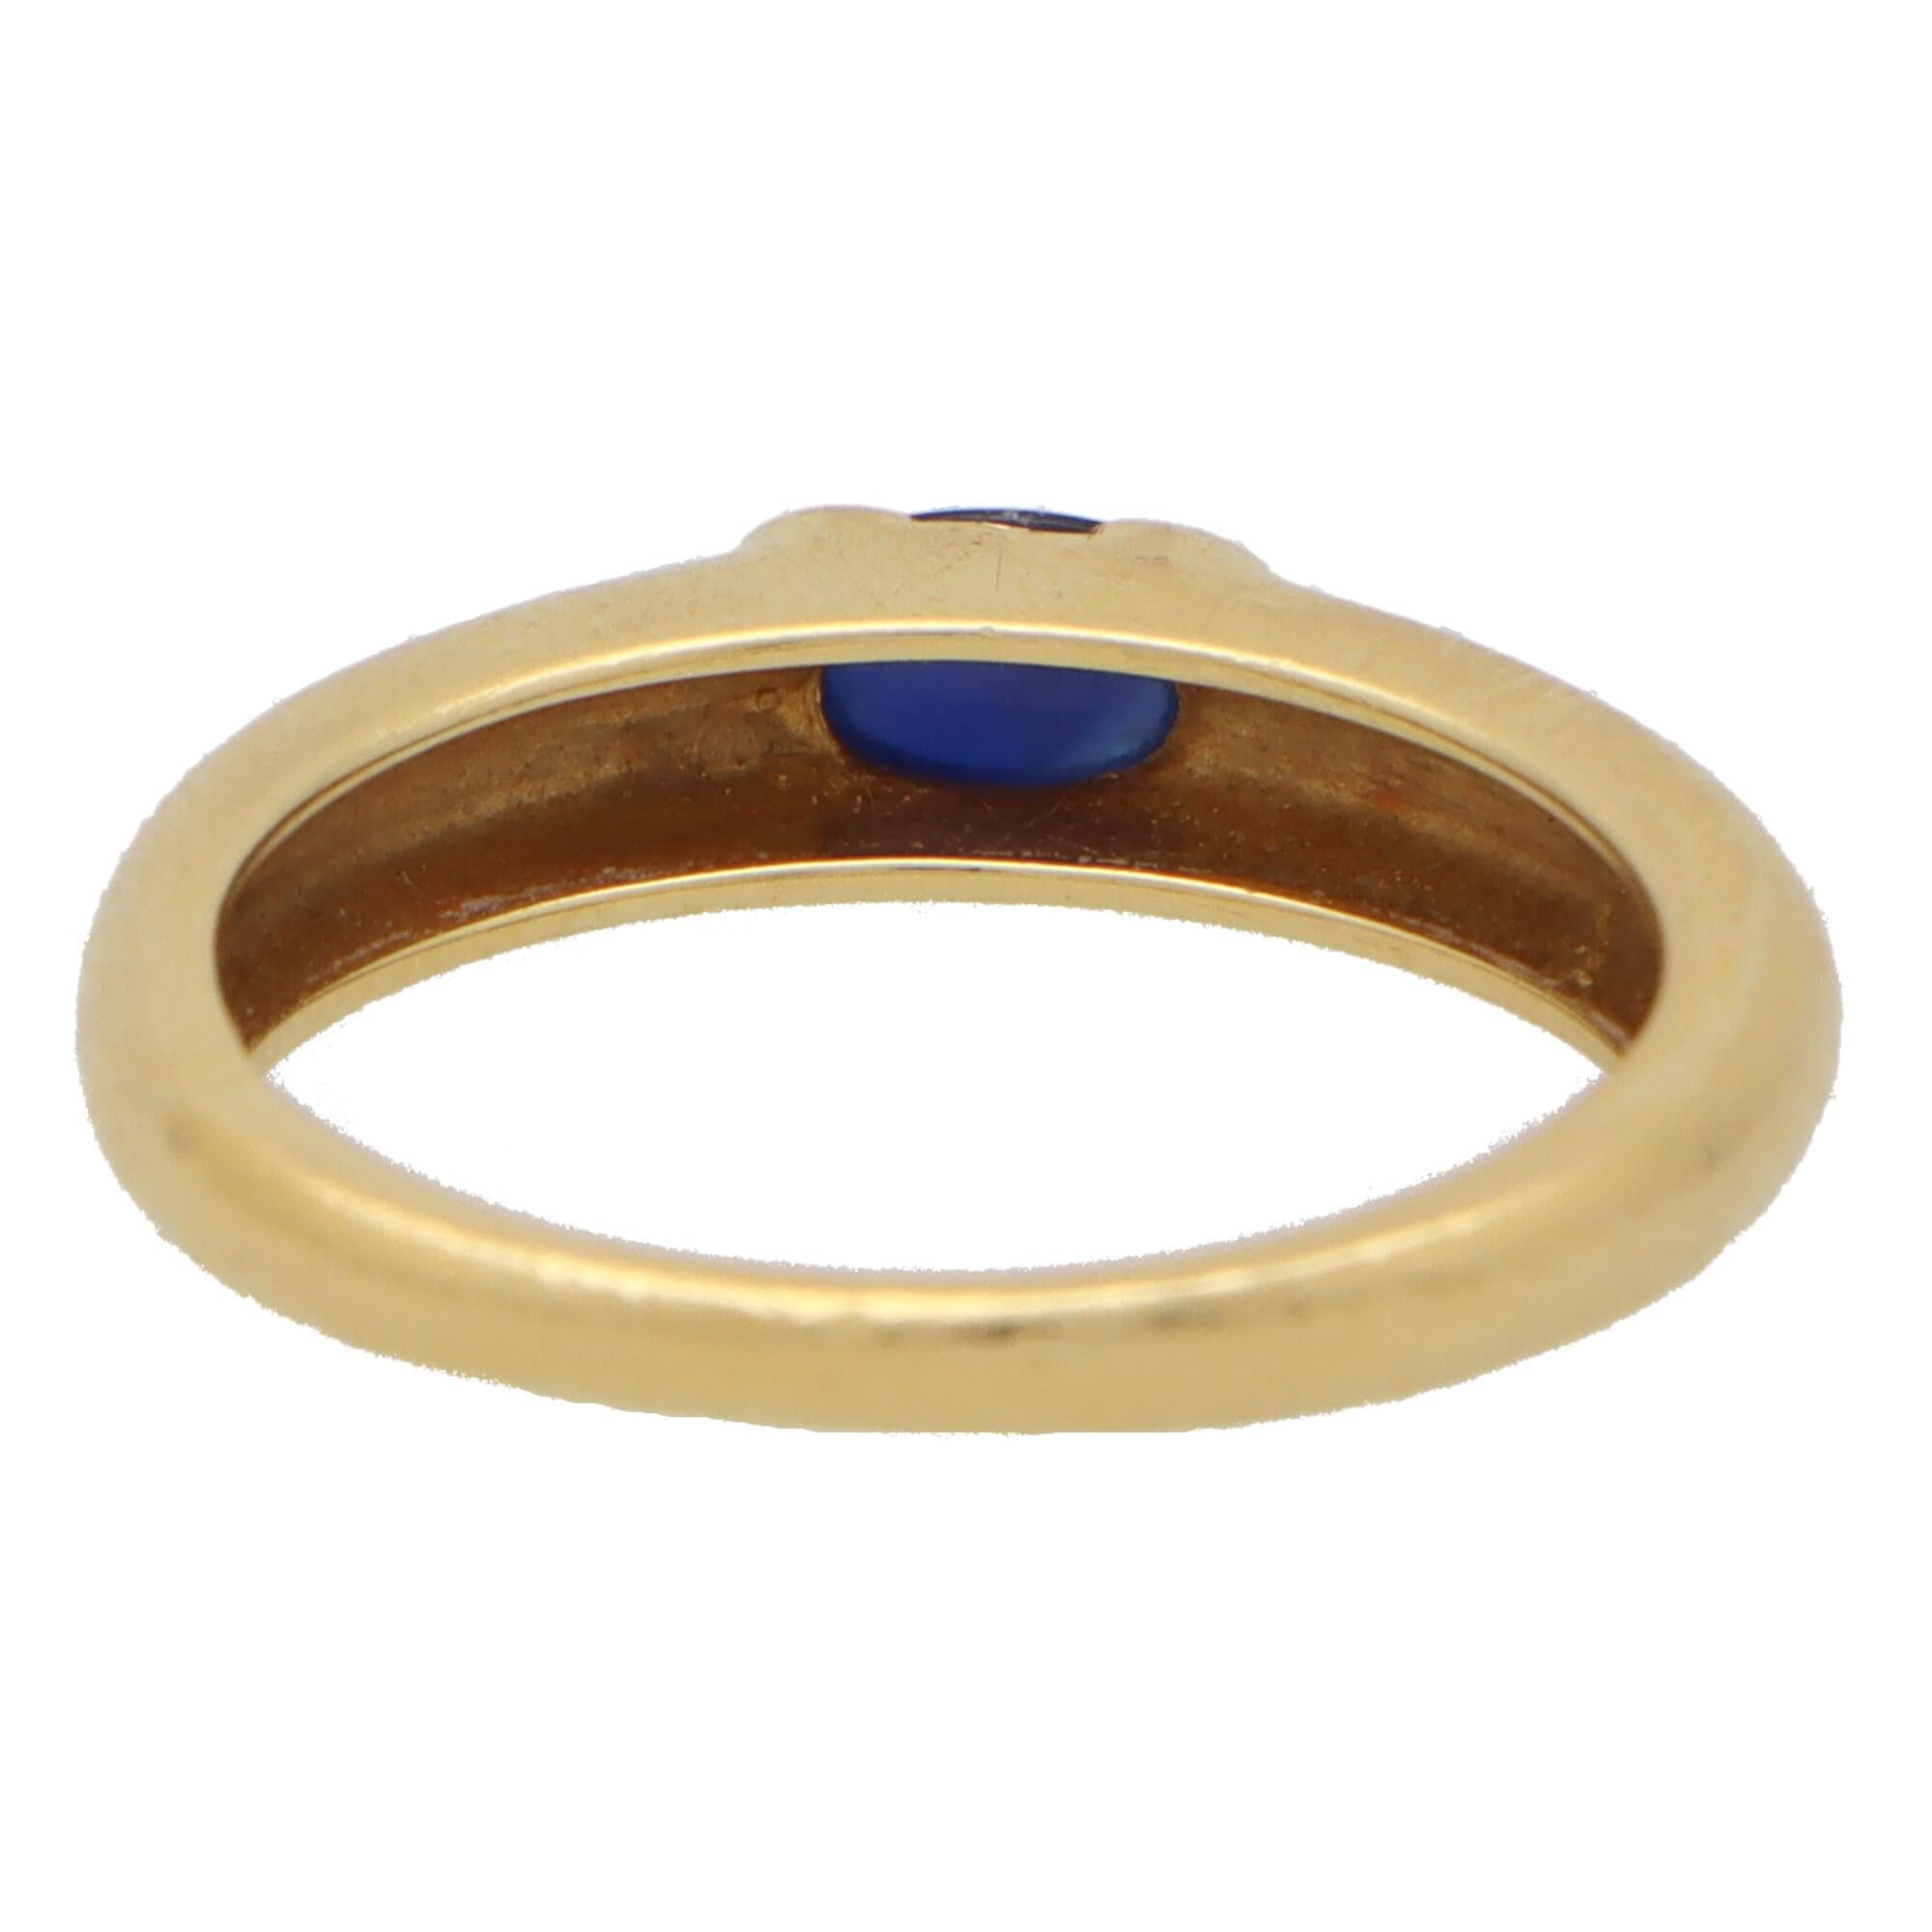 Women's or Men's Vintage Tiffany & Co. Sapphire Band Ring Set in 18k Yellow Gold